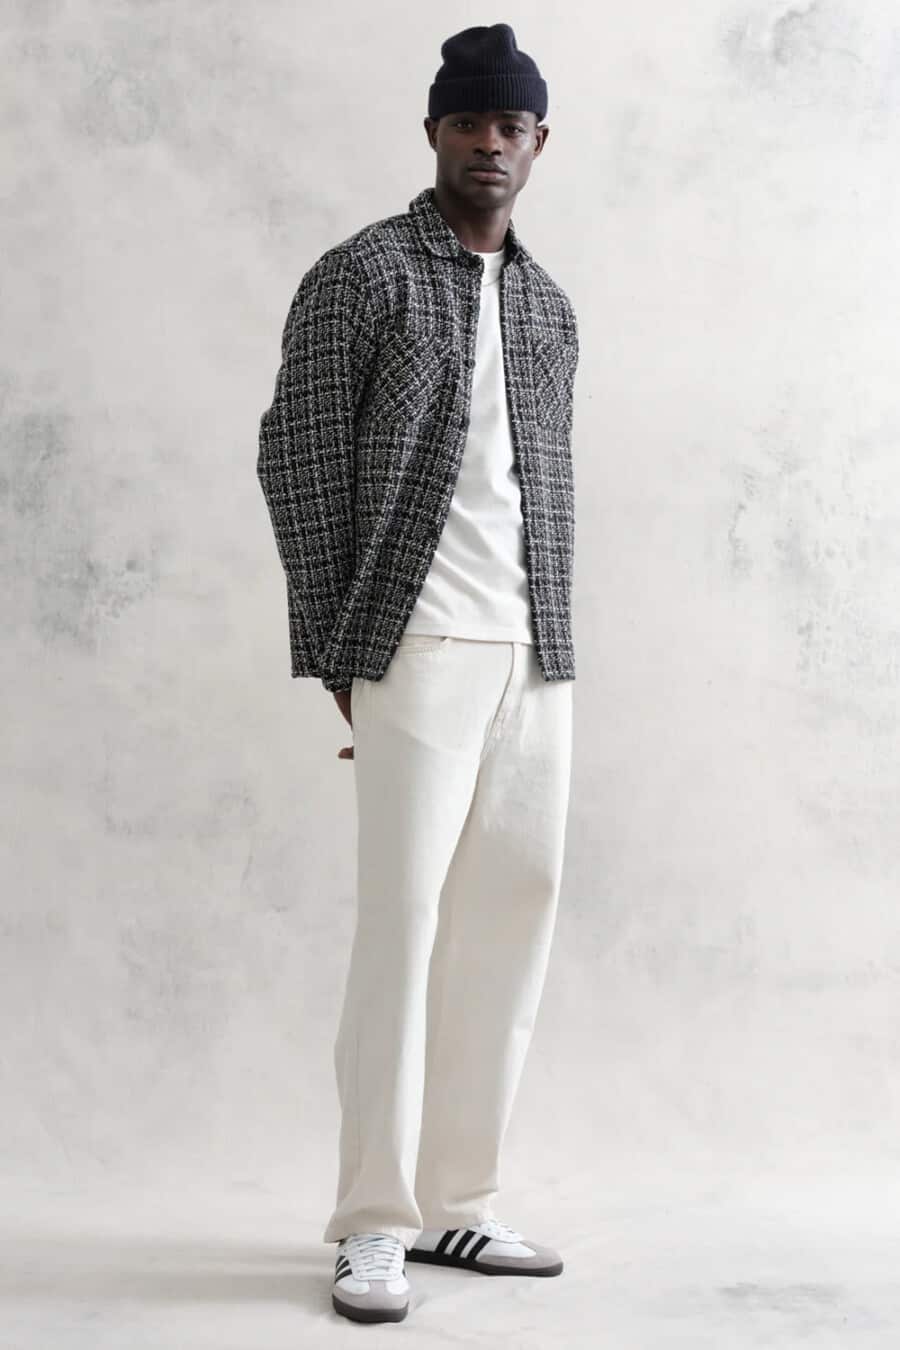 Men's off-white jeans, white T-shirt, black and grey checked overshirt, black beanie and Adidas Samba sneakers outfit